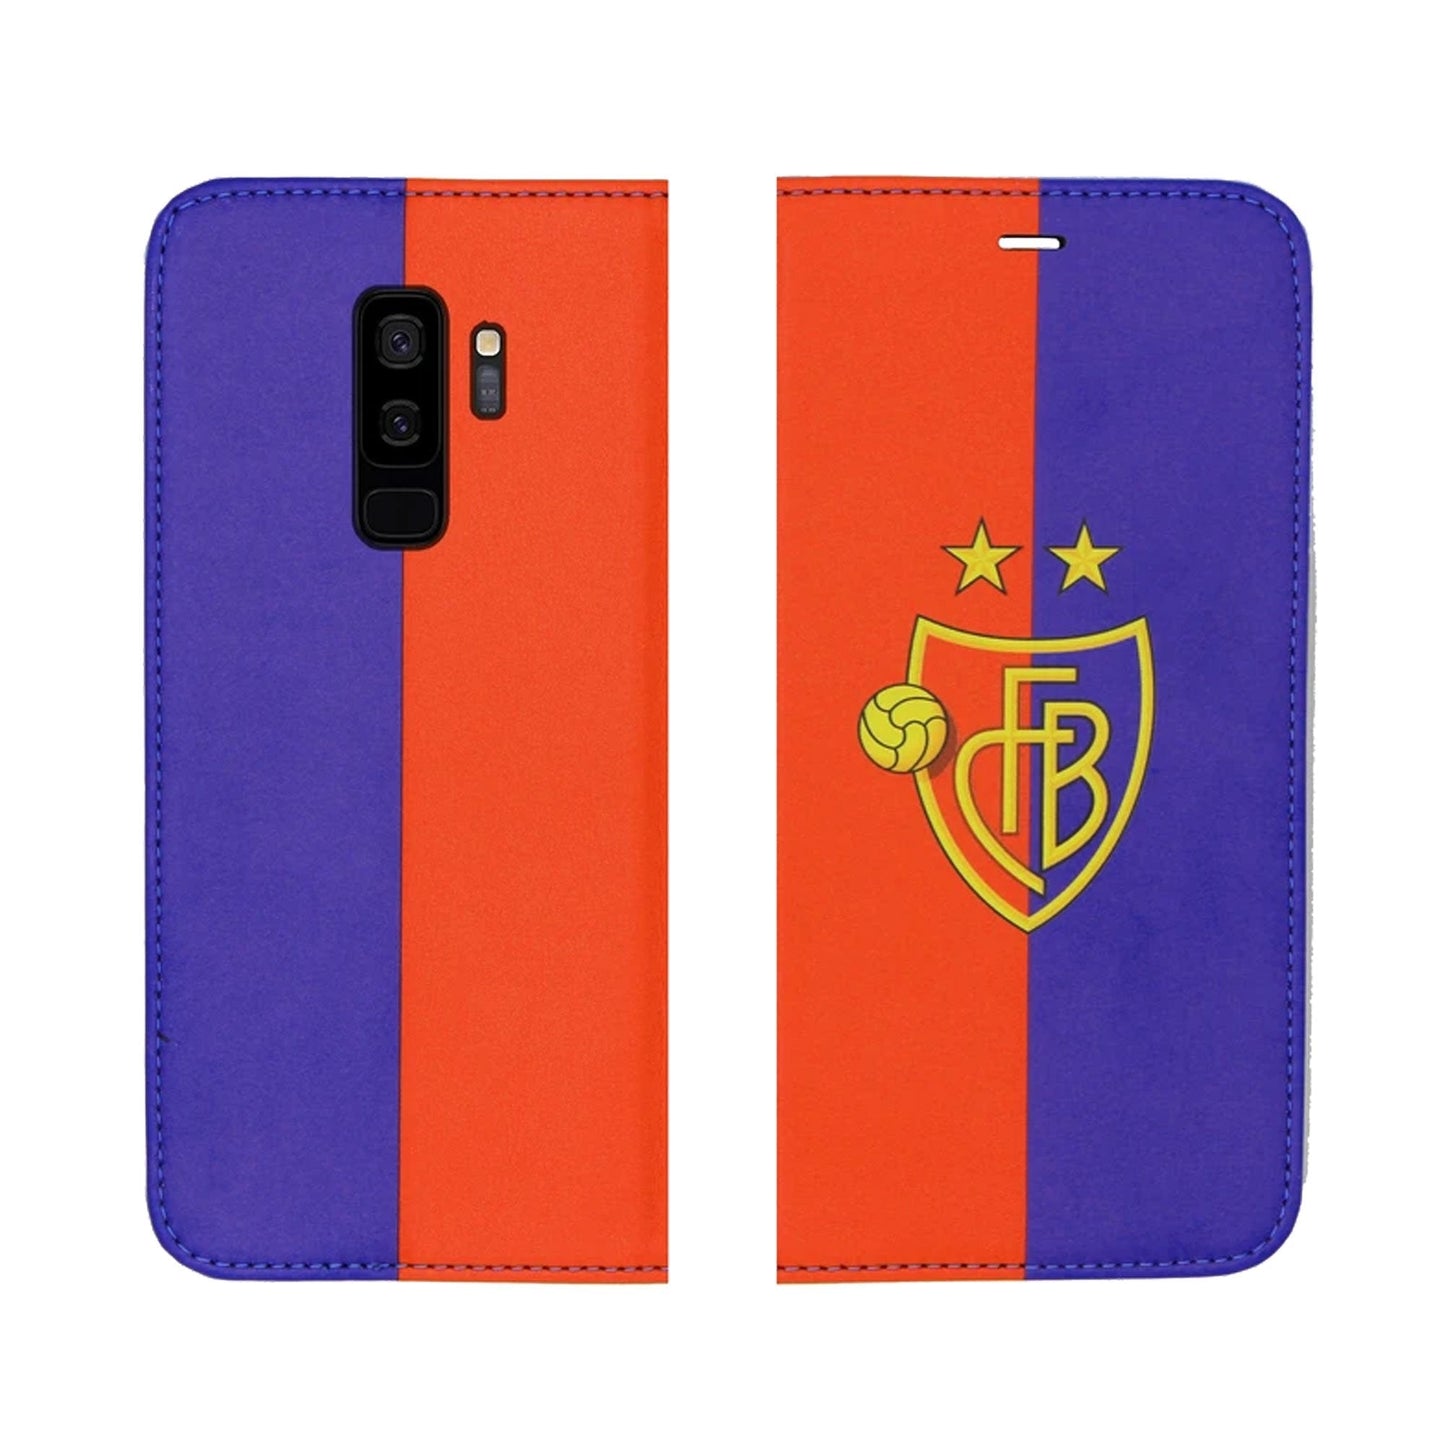 FCB Red / Blue Panorama Case for iPhone and Samsung